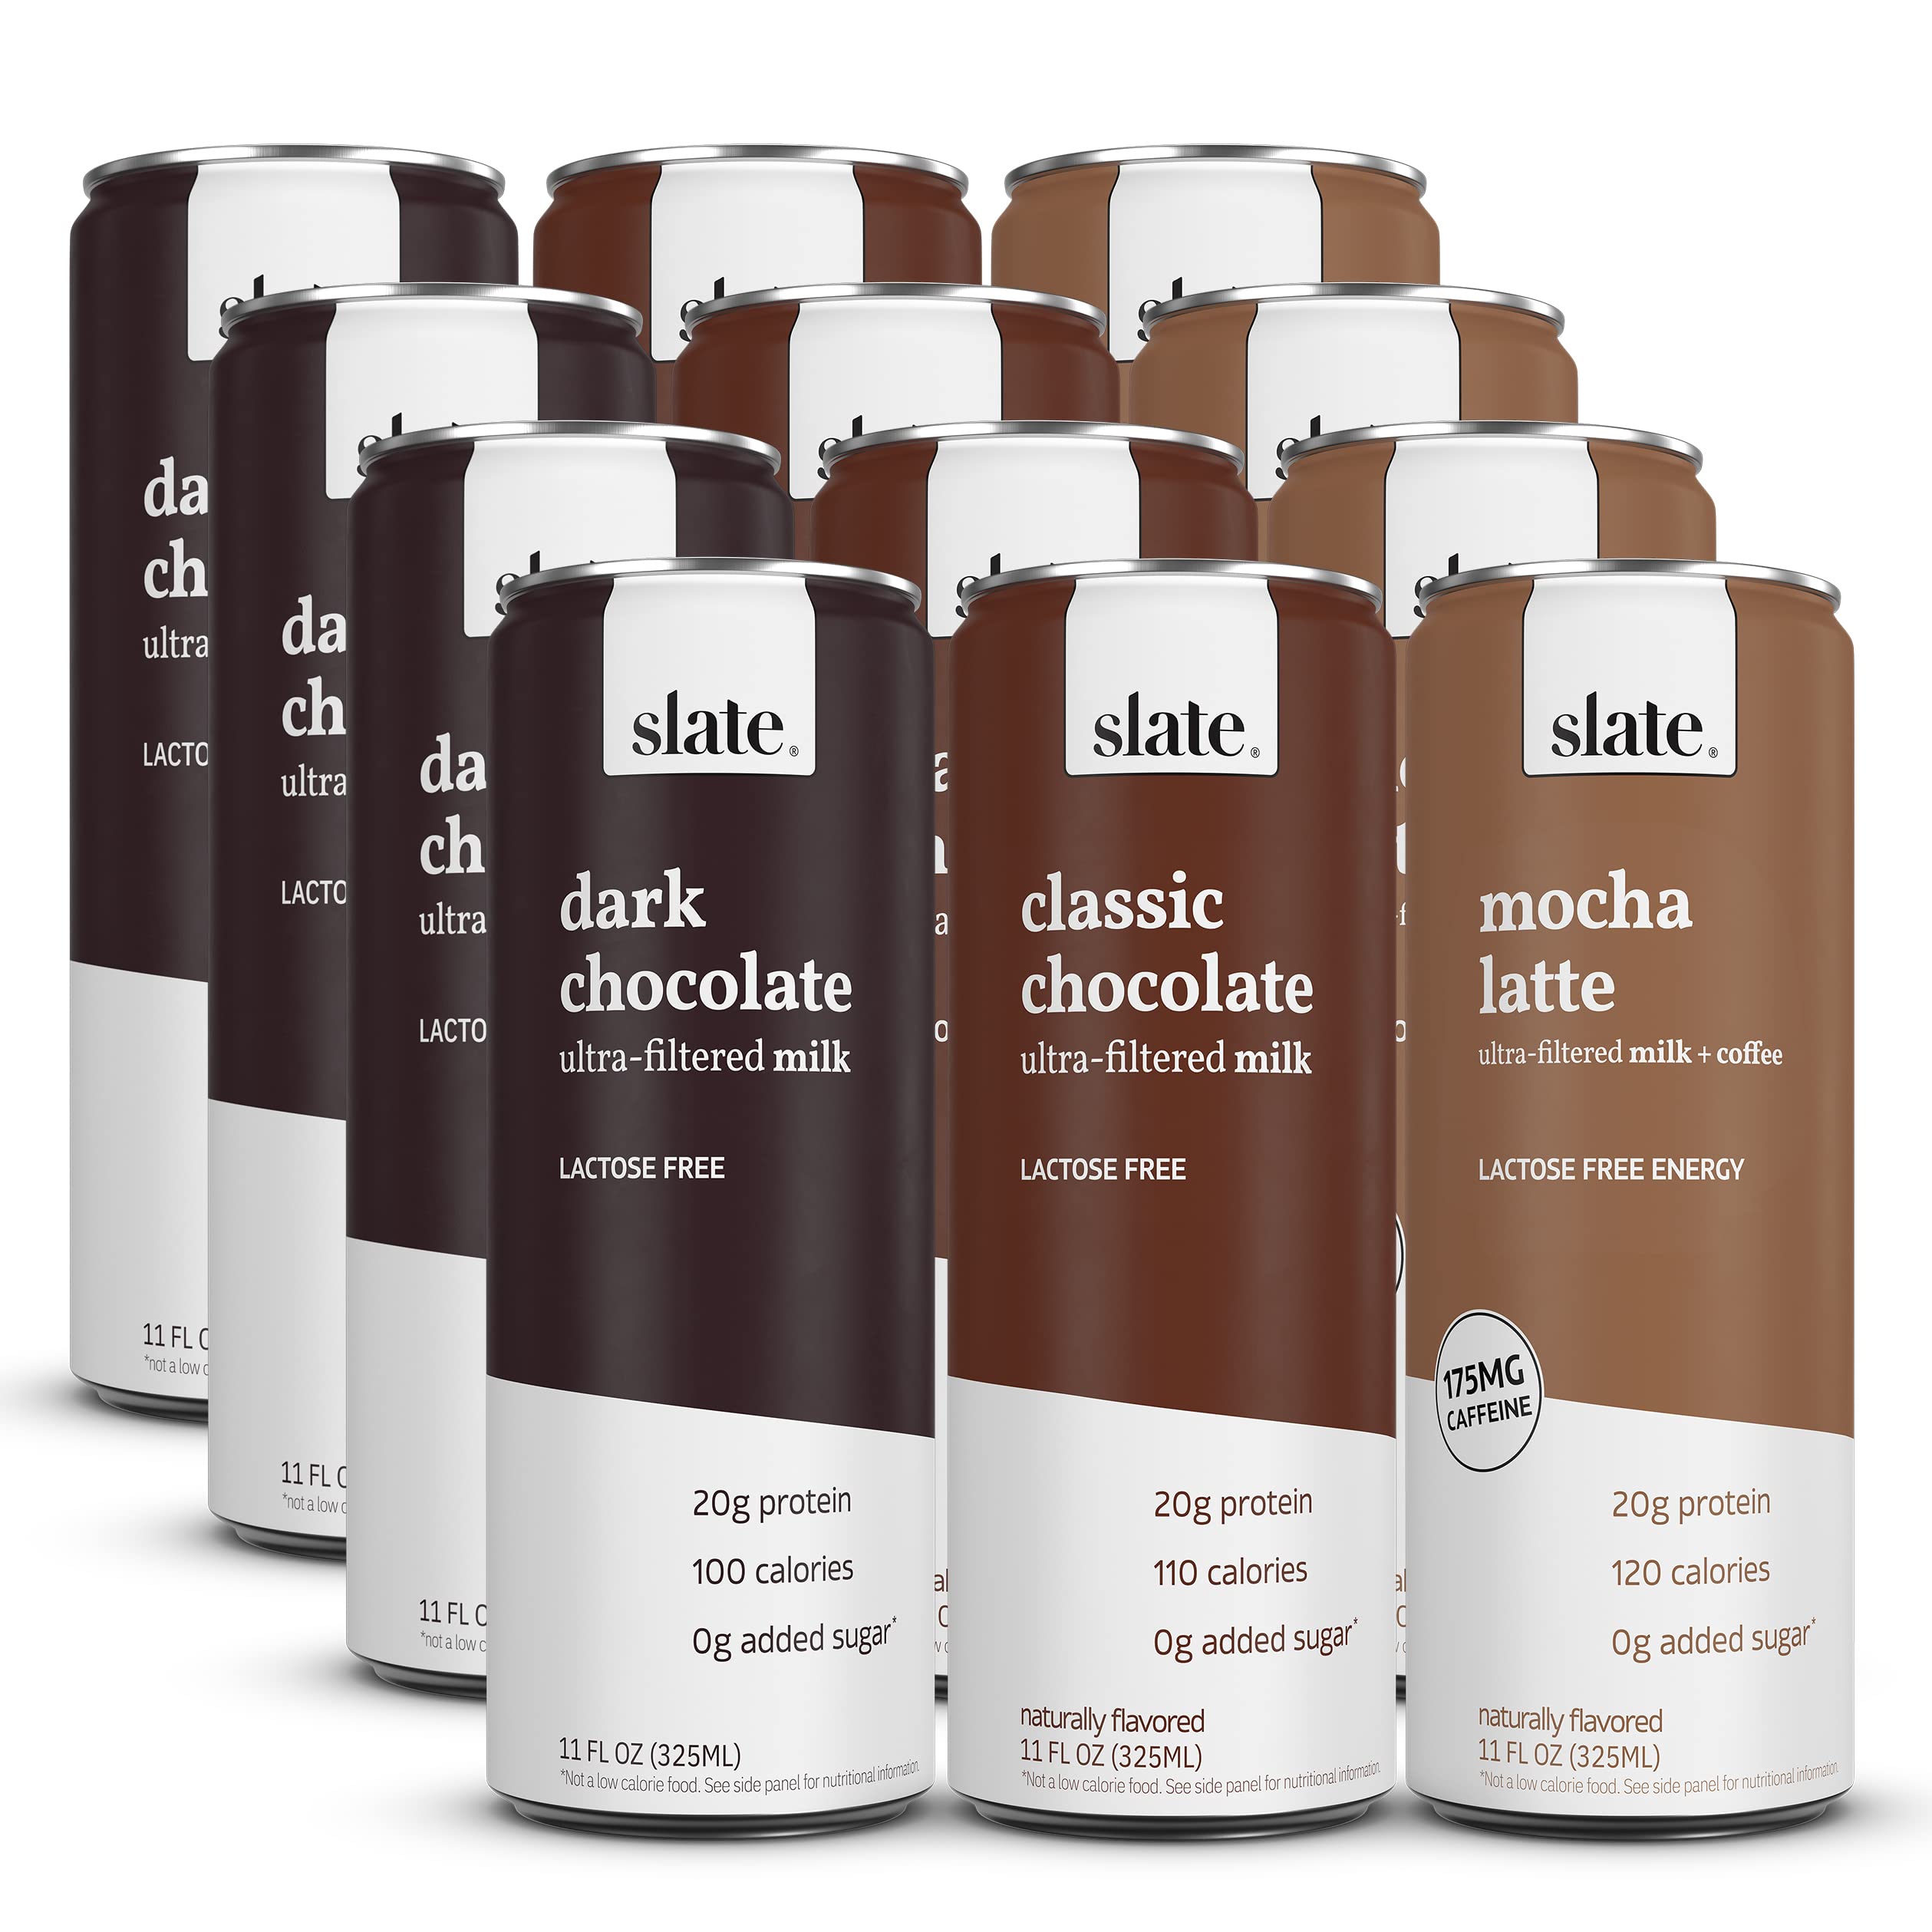 Introducing your new protein packed, healthy, pick-me-up! Slate Espresso  Chocolate Milk is all natural, lactose free and contains 20g…